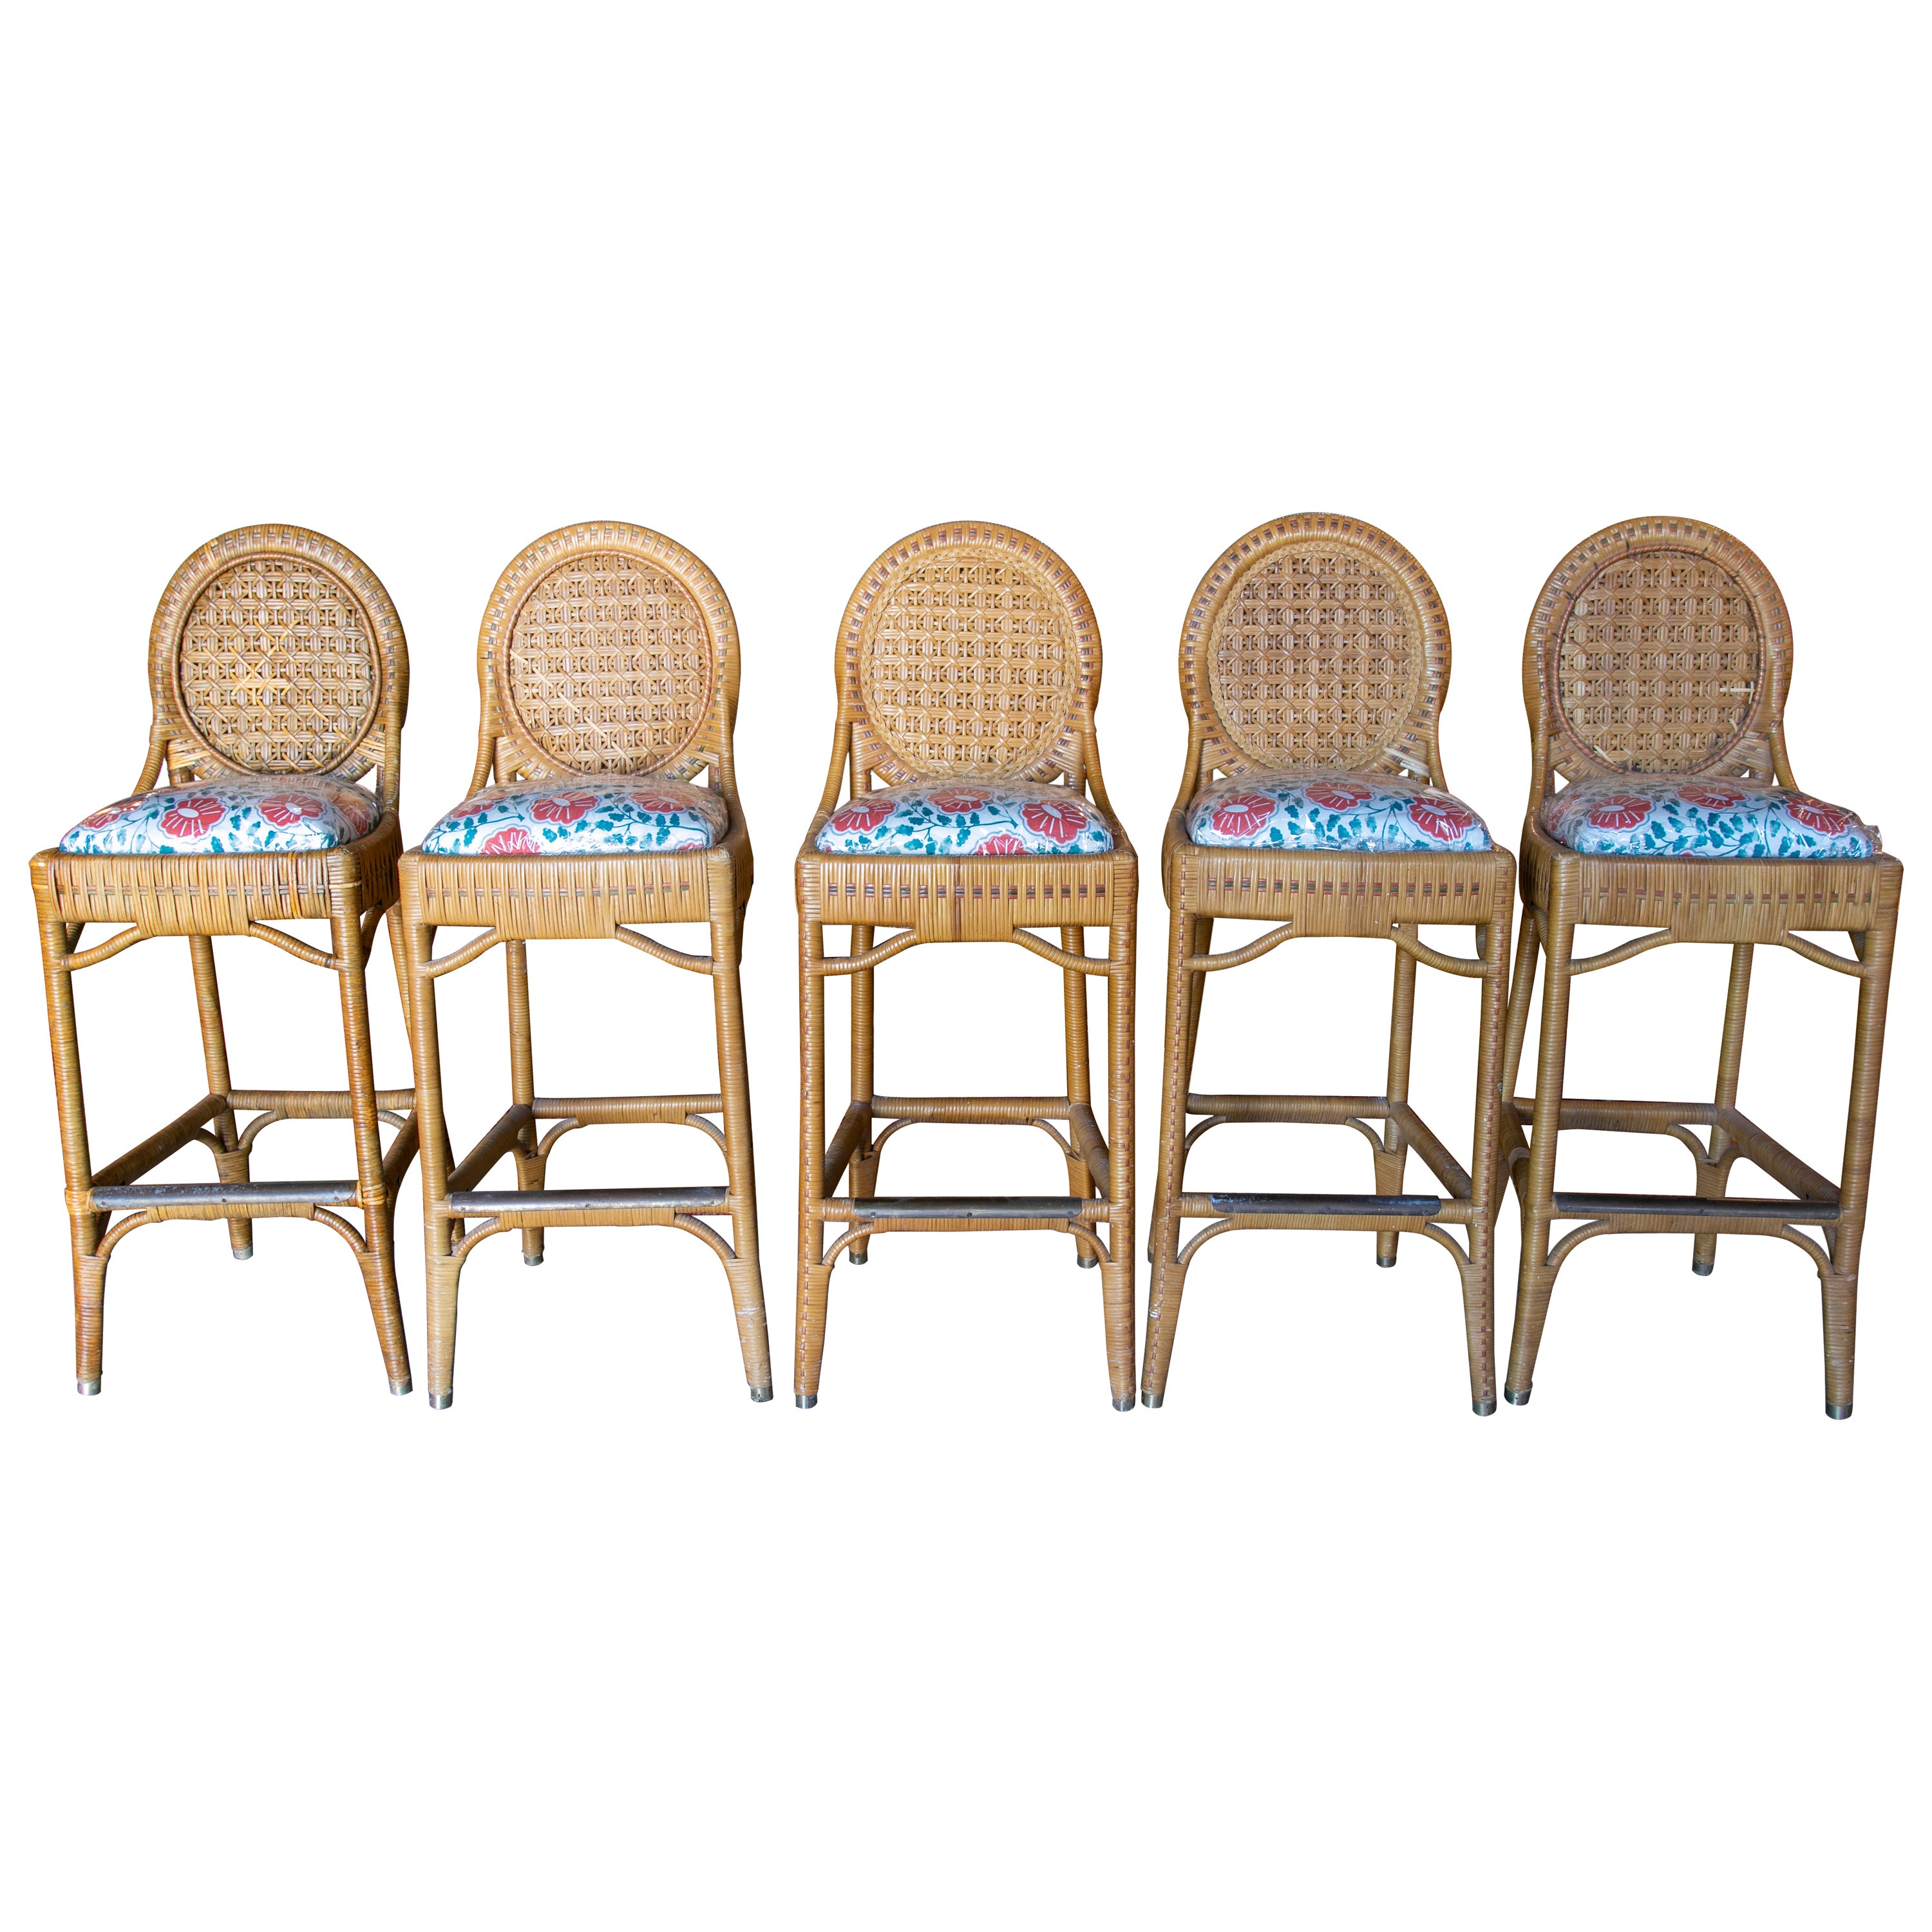 1980s Set of Five Upholstered Wicker Stools